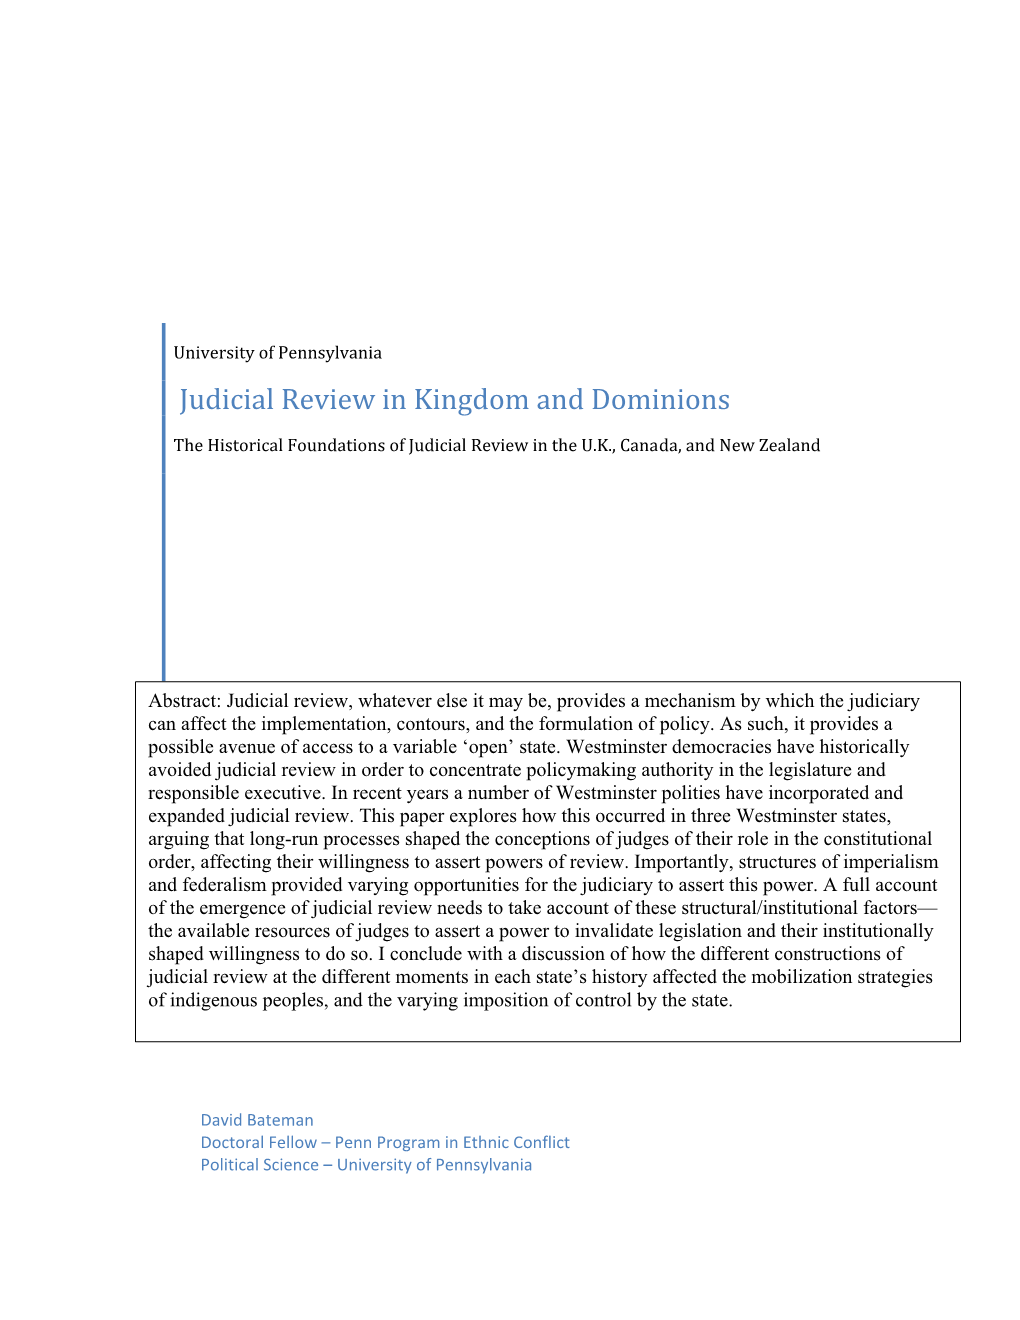 Judicial Review in Kingdom and Dominions the Historical Foundations of Judicial Review in the U.K., Canada, and New Zealand